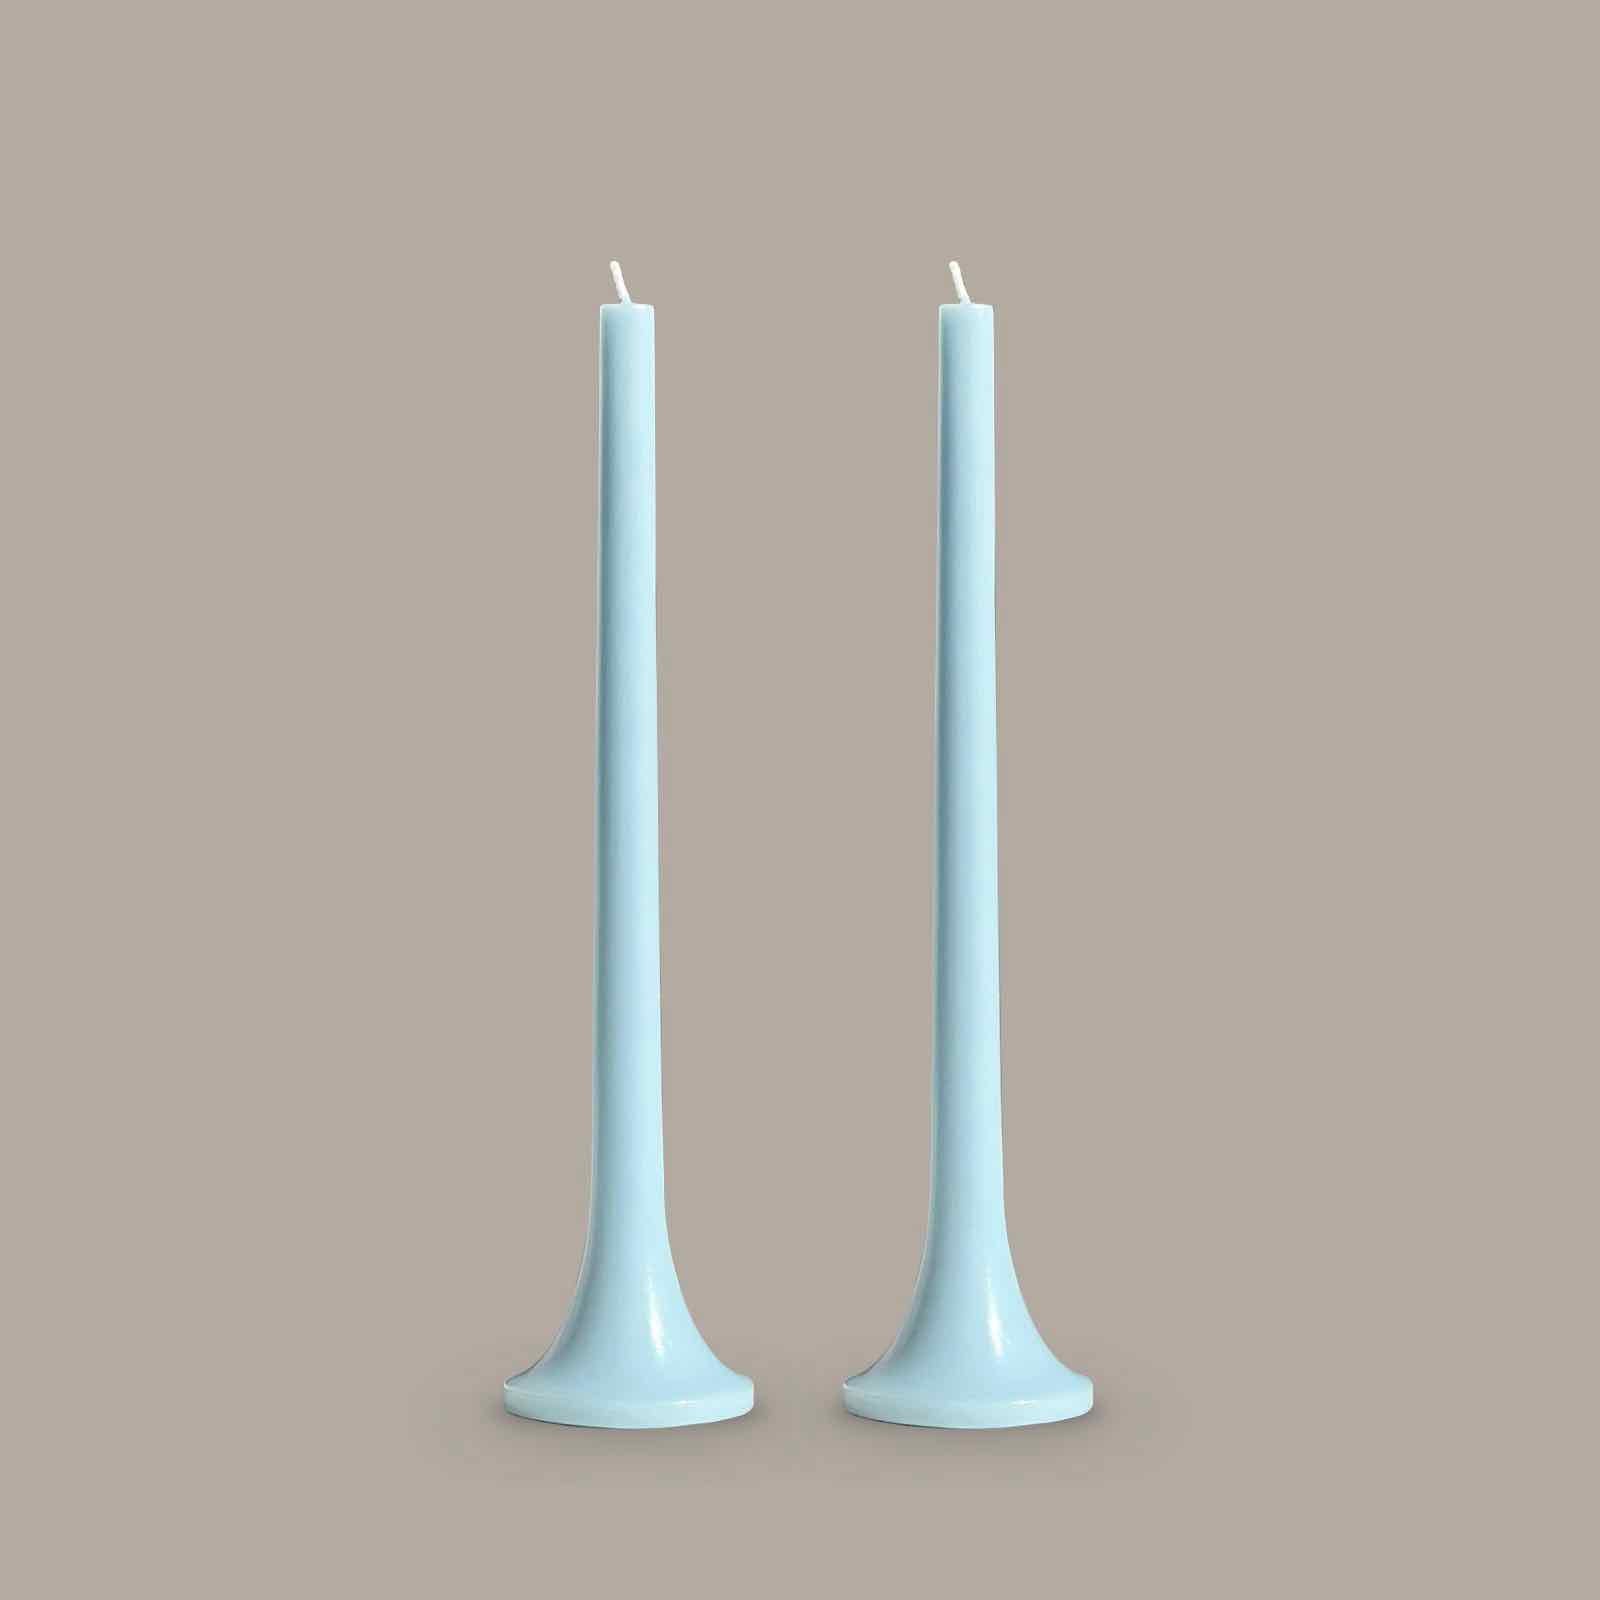 Pale blue taper candles